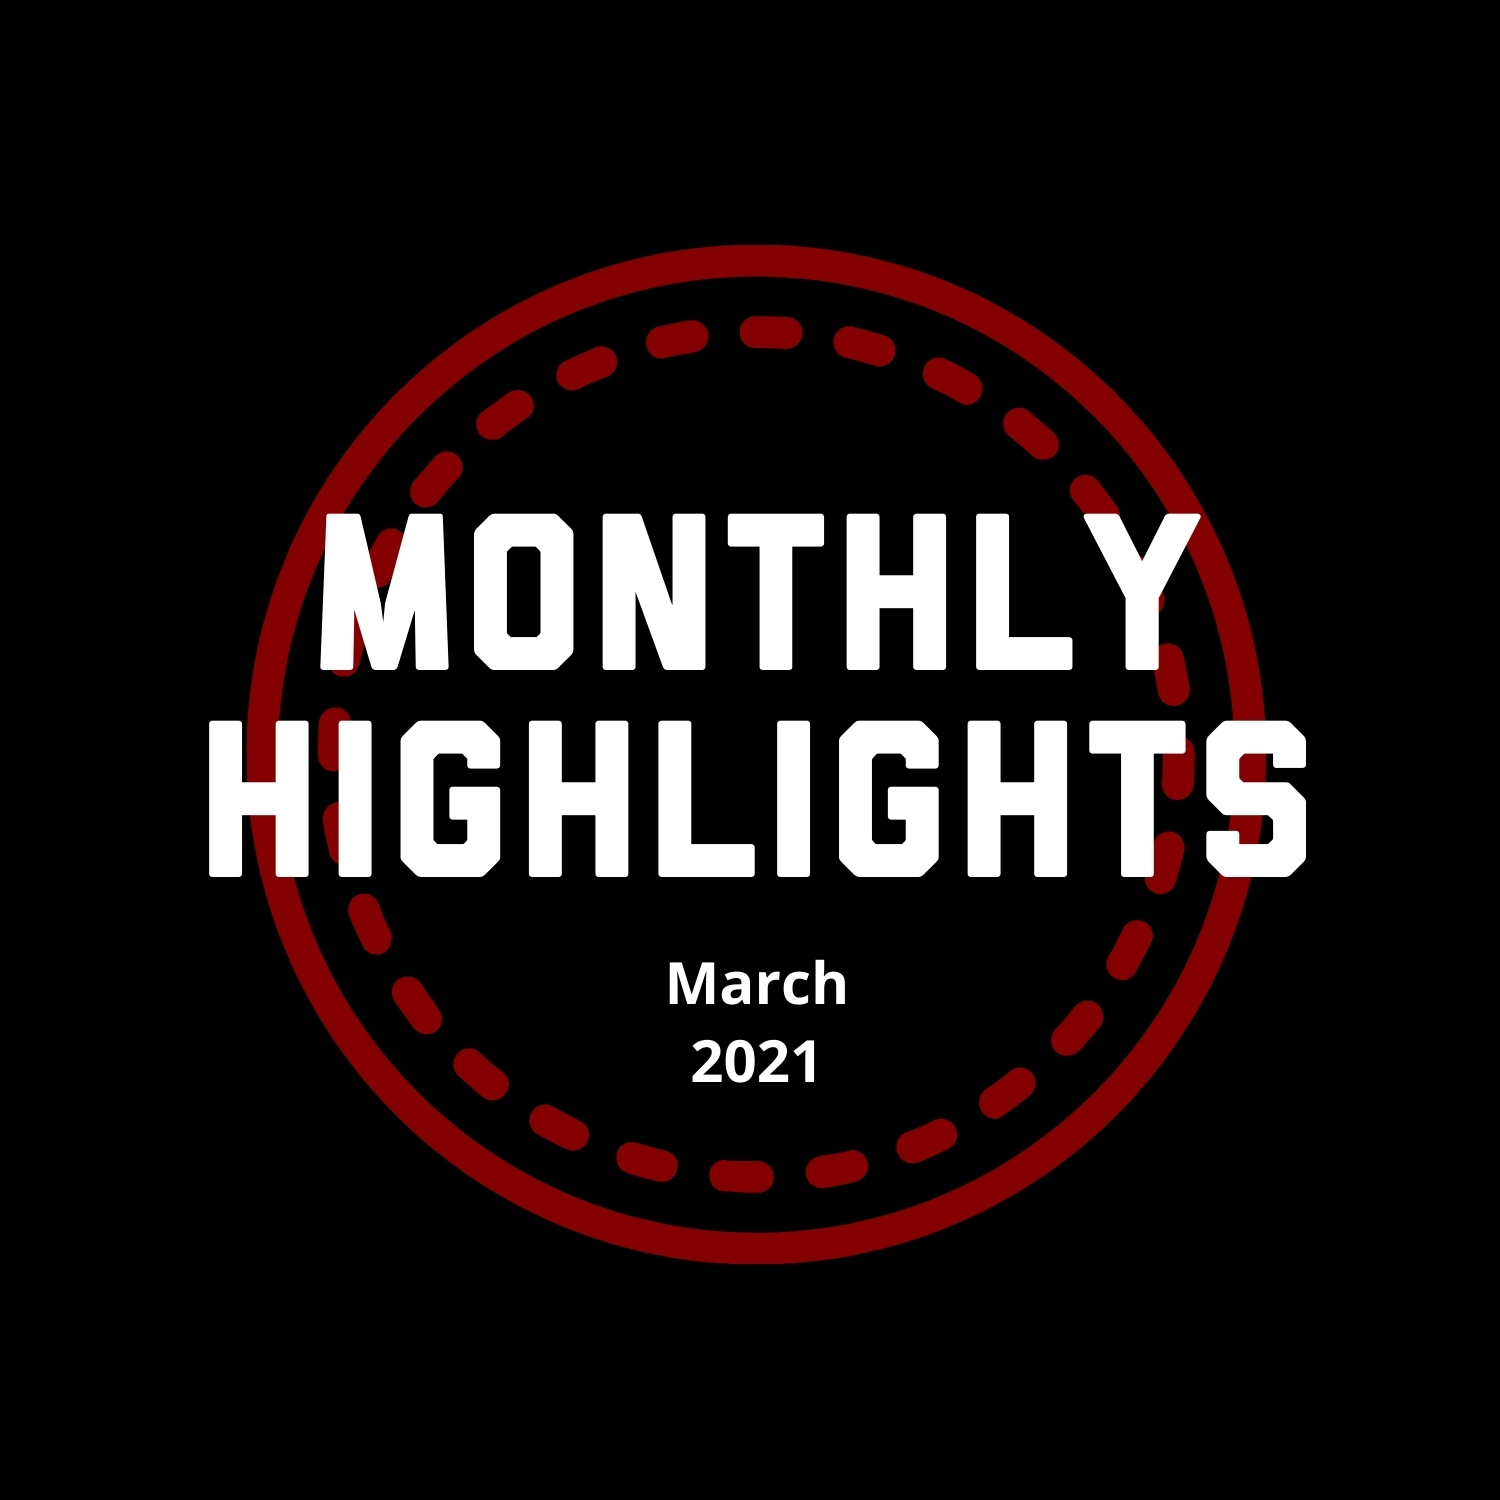 Monthly Highlights March 2021